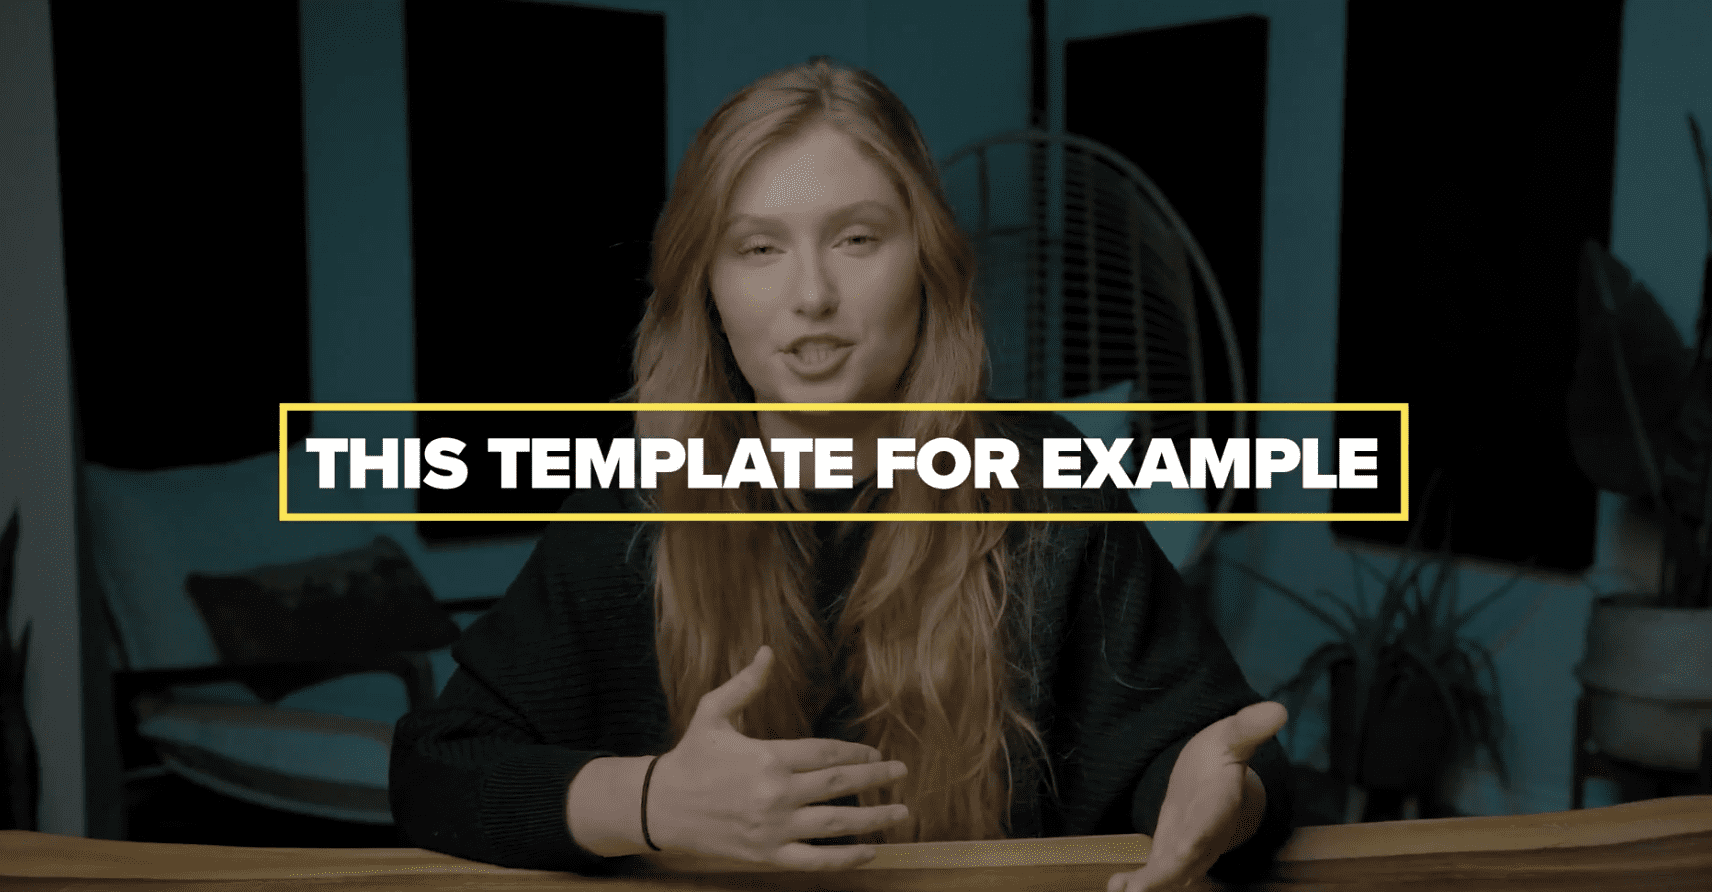 Customizing a title template for video editing